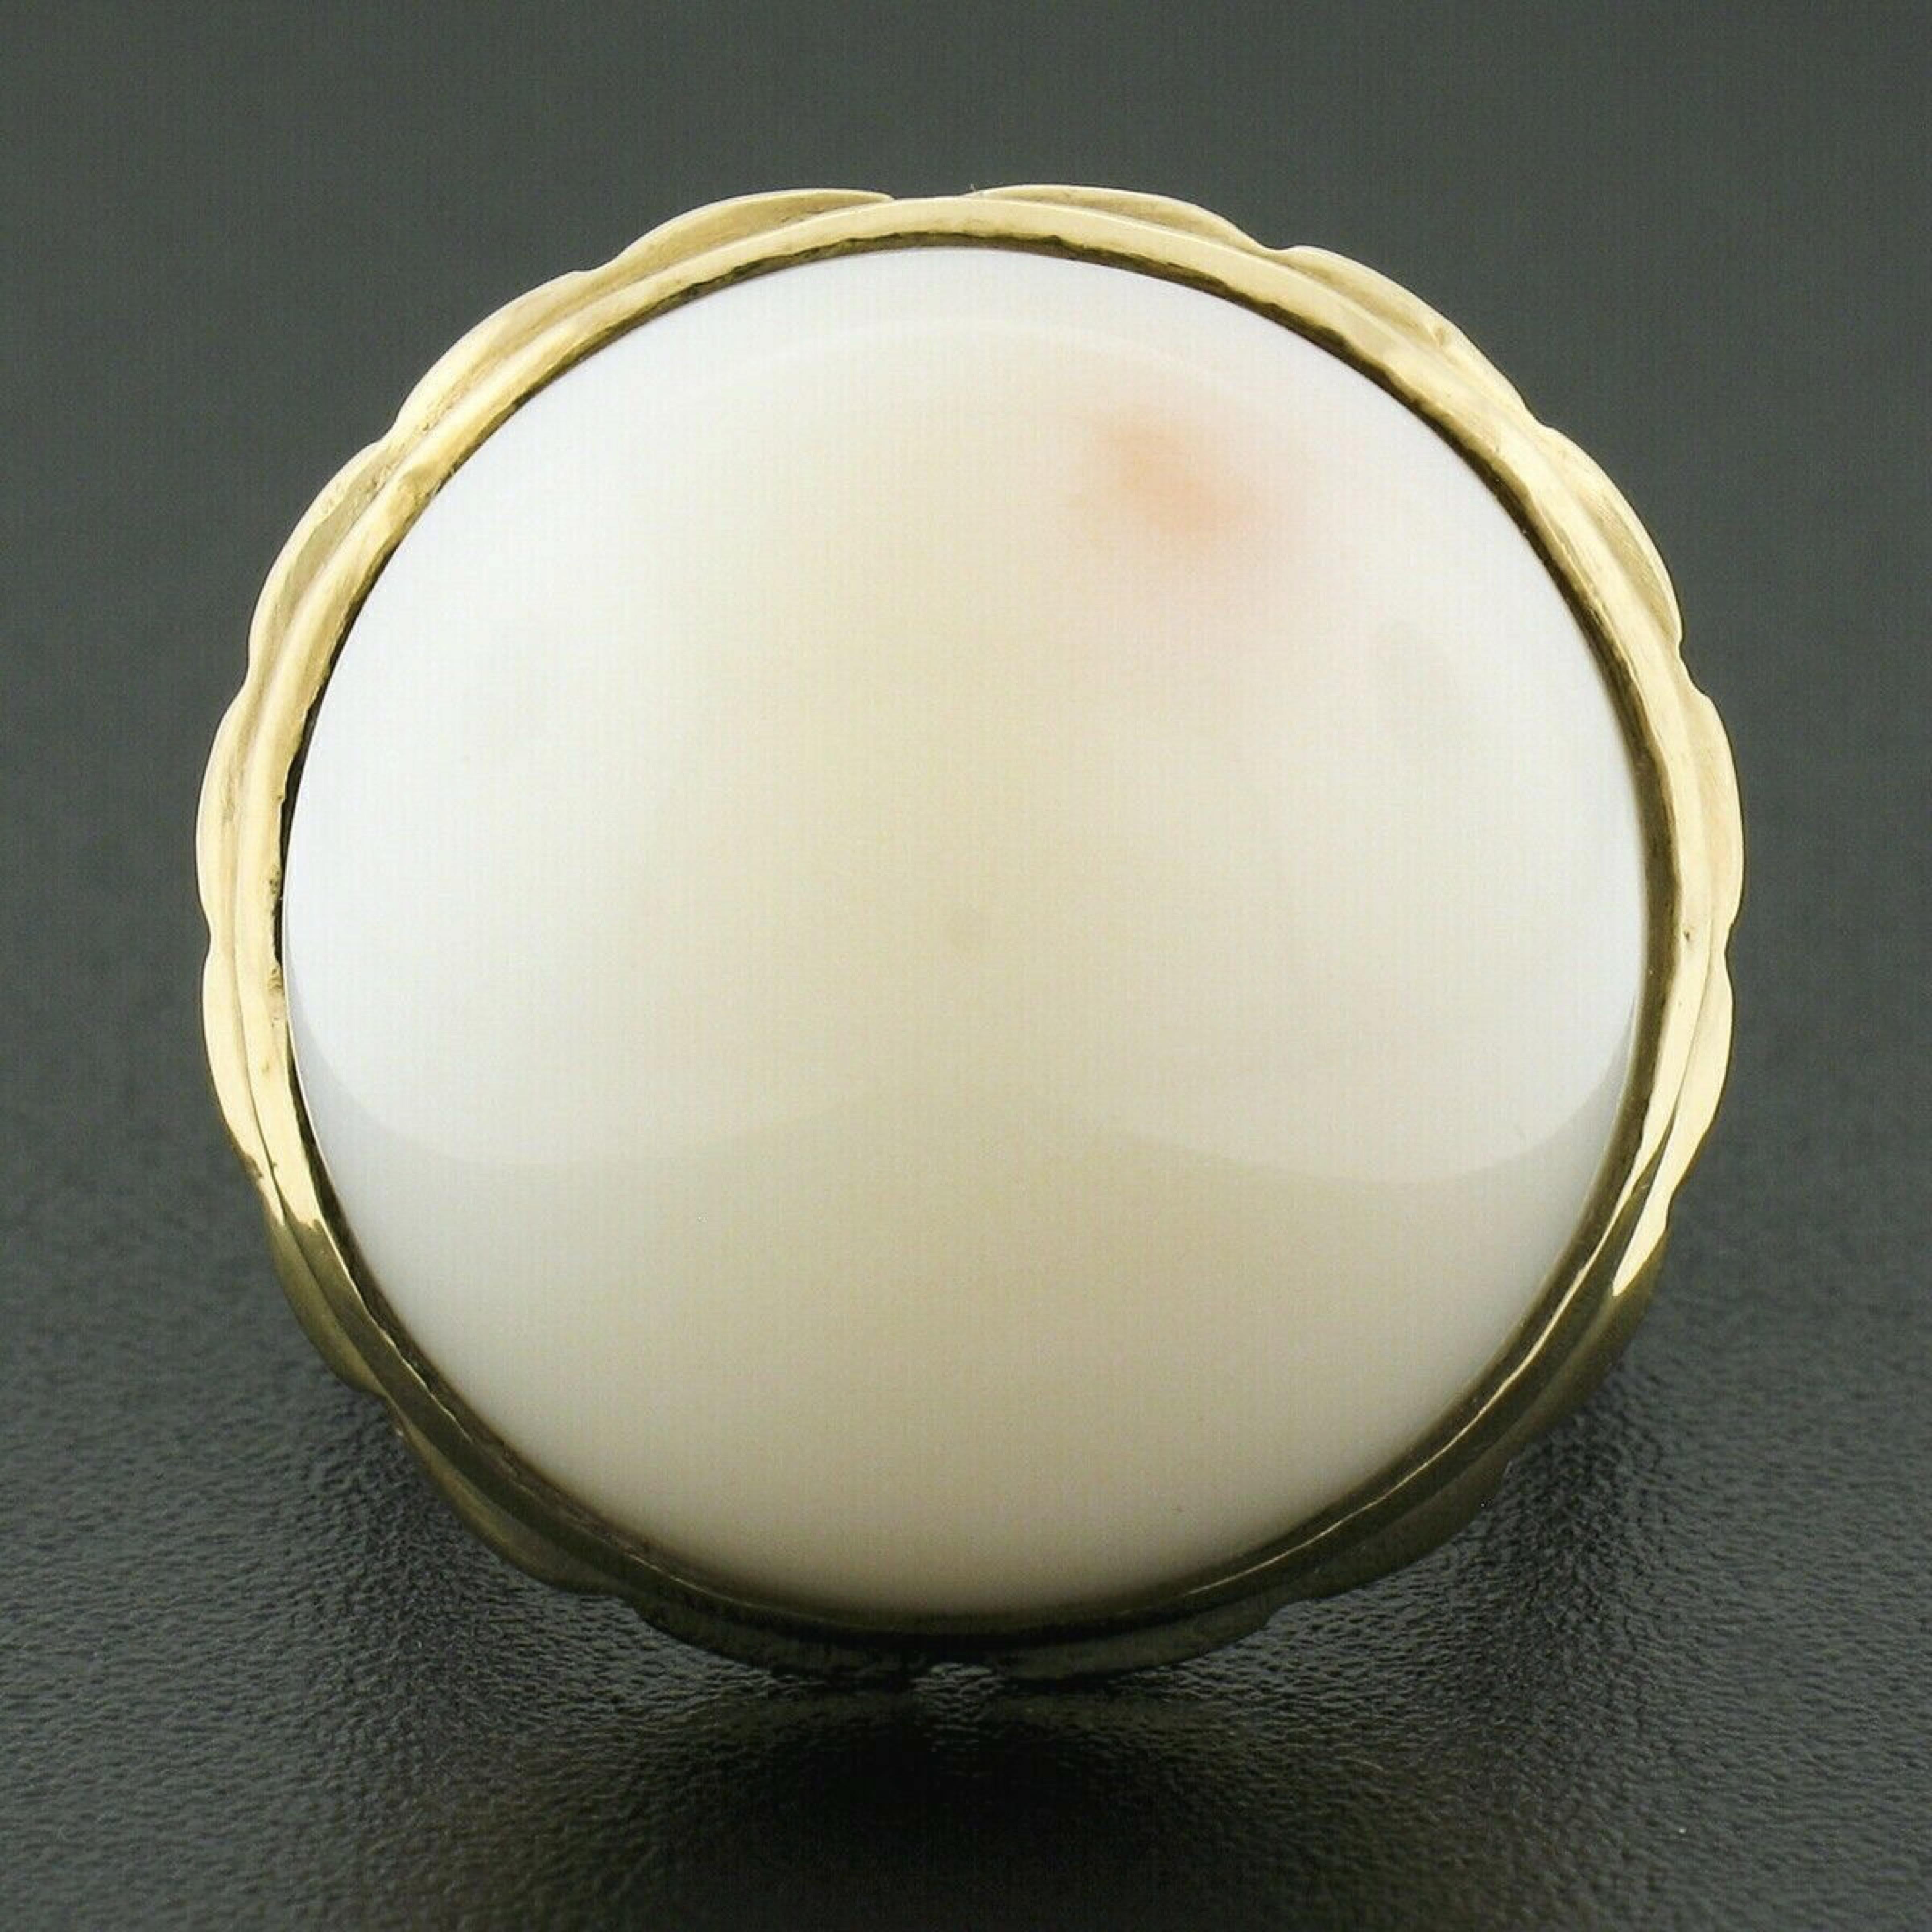 This gorgeous and well made vintage cocktail ring is crafted in solid 14k yellow gold and features a round cabochon cut angel skin coral neatly bezel set at its top. The fine coral measures approximately 19.6mm, showing a very large and attractive